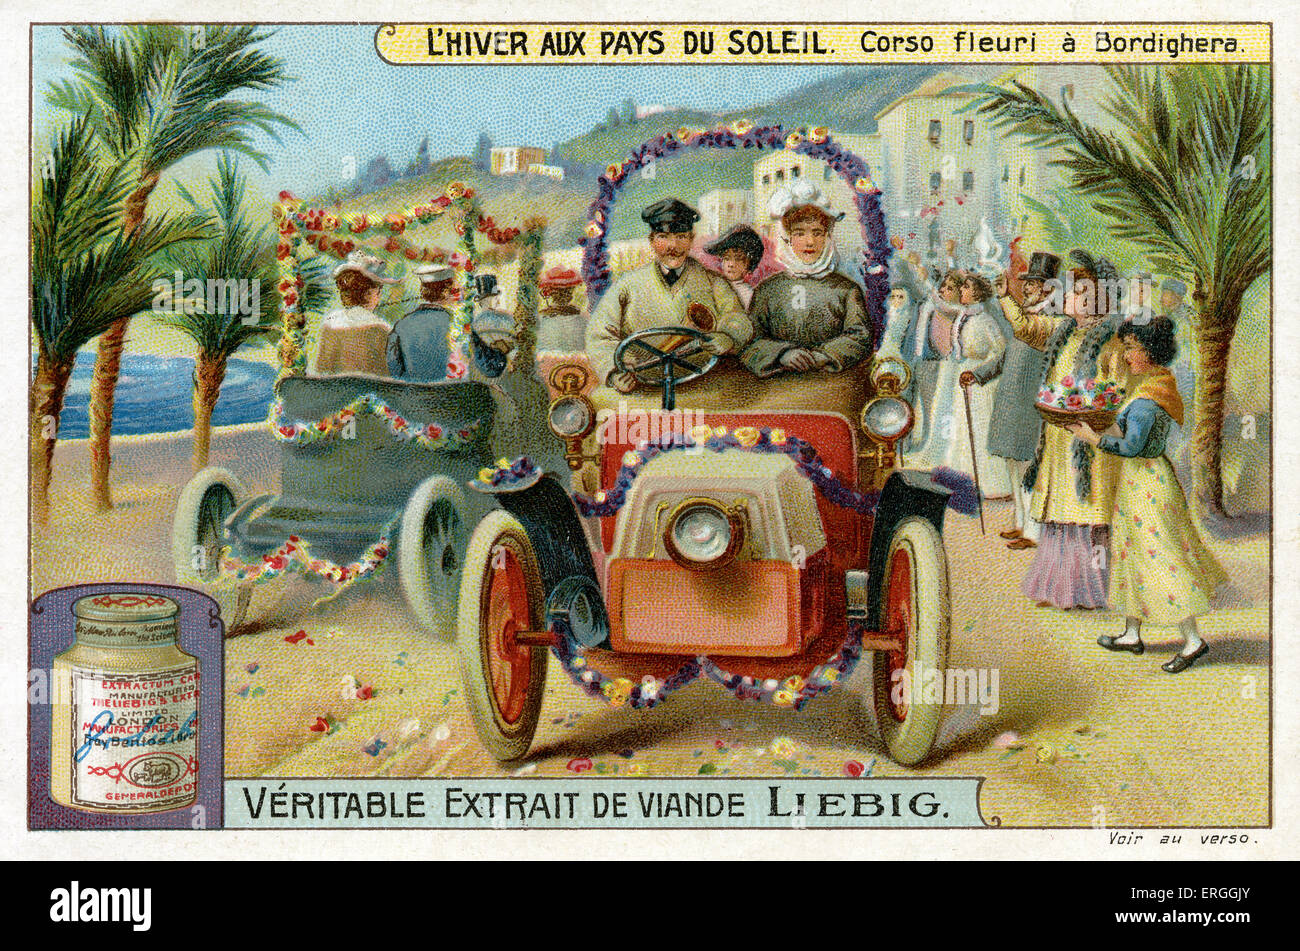 Winter in the Sun: Flower parade in Bordighera, Italy.   1910. Liebig Collectible Card ('L'Hiver aux pays du soleil: Corso Stock Photo